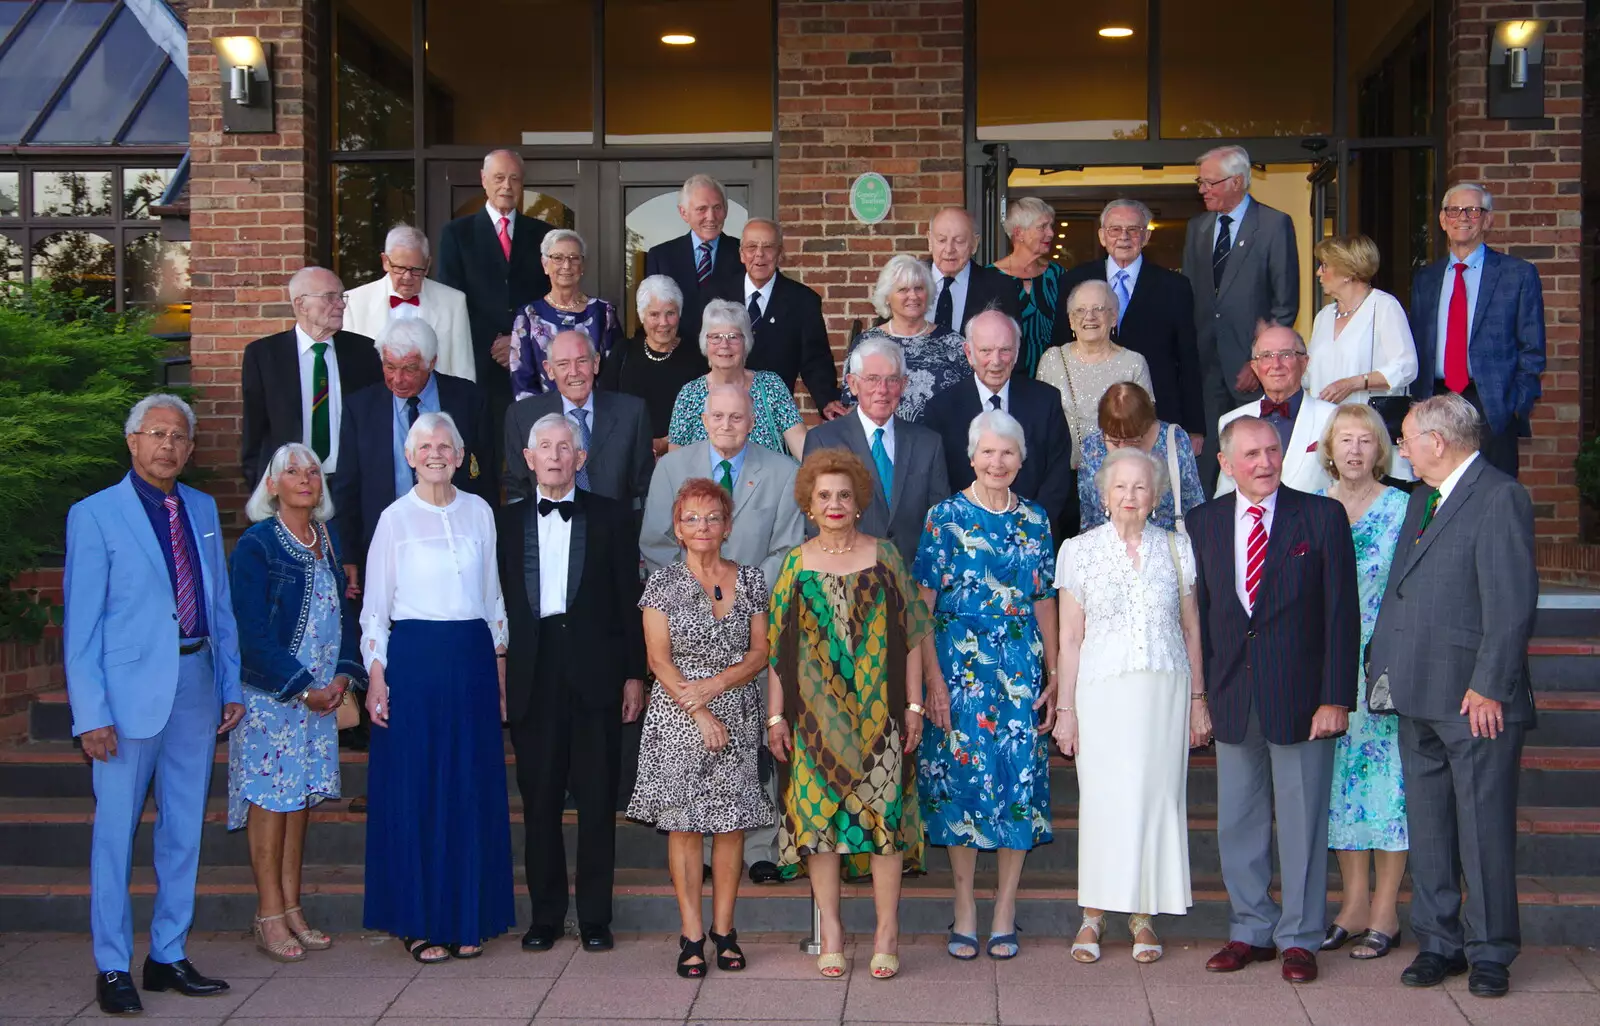 A group photo of the 69th Entry, plus partners, from Kenilworth Castle and the 69th Entry Reunion Dinner, Stratford, Warwickshire - 14th September 2019